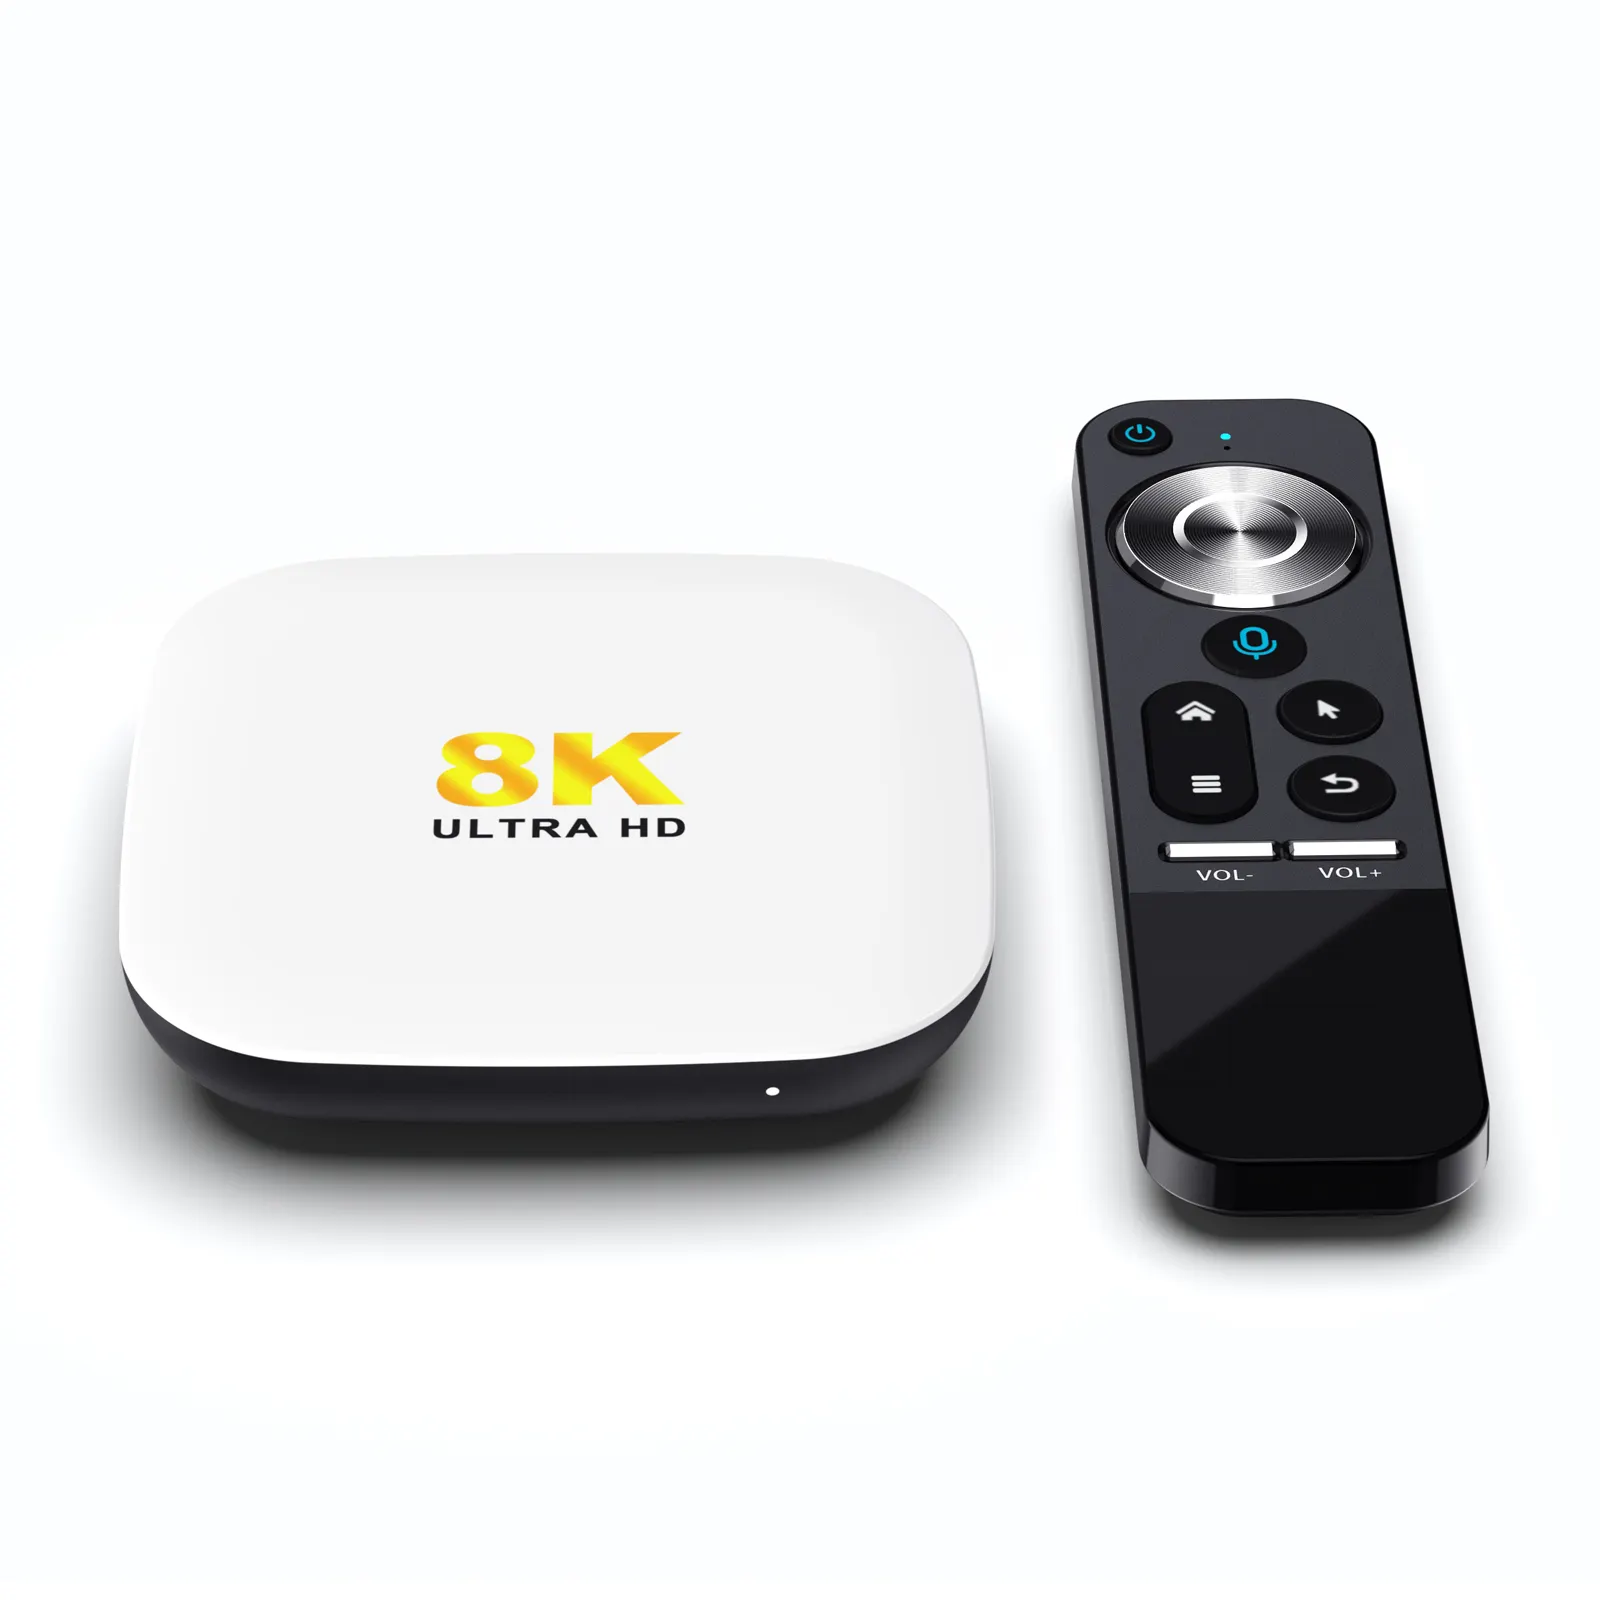 2023 H96 MAX M2 factory direct smart android13.0 set top box New arrival support 8k 1000M net port rockchip 3528 multi-Language